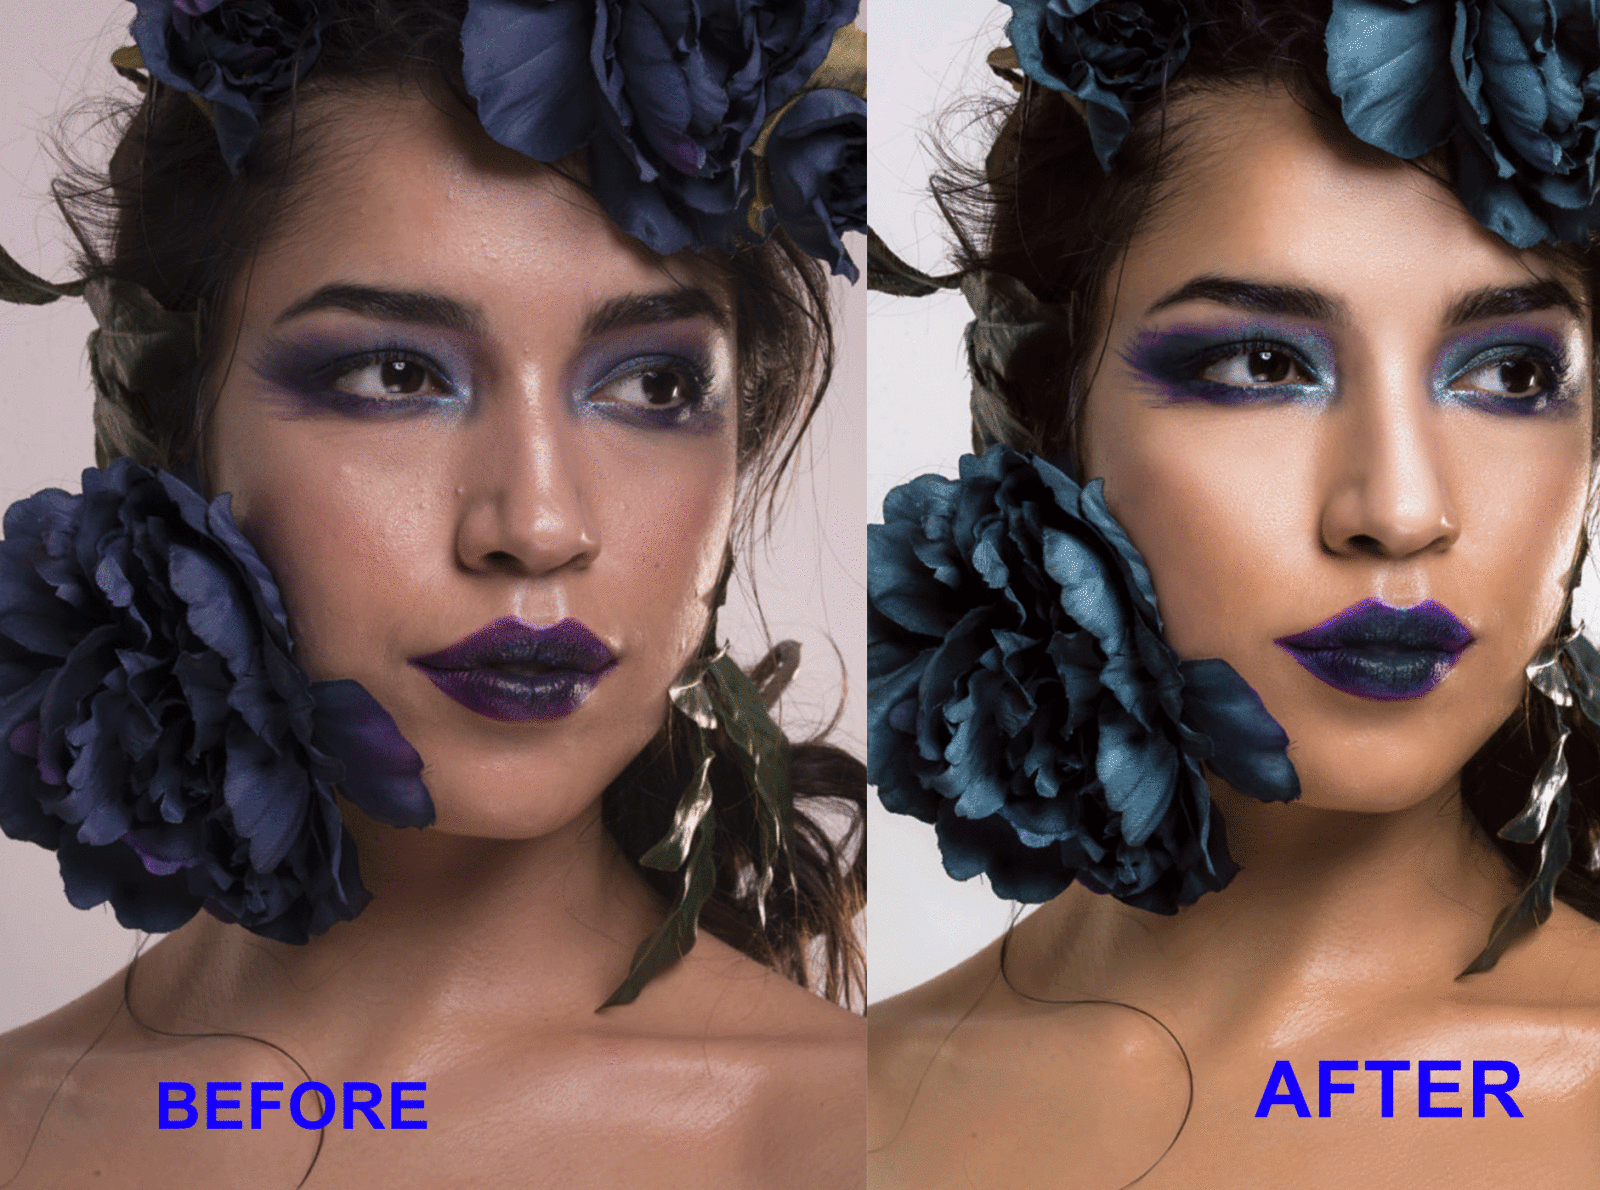 Retouching services professionally background removal clippingpath cropping design photographer photoshop product photo editing remove background resizing retouching transparent vector